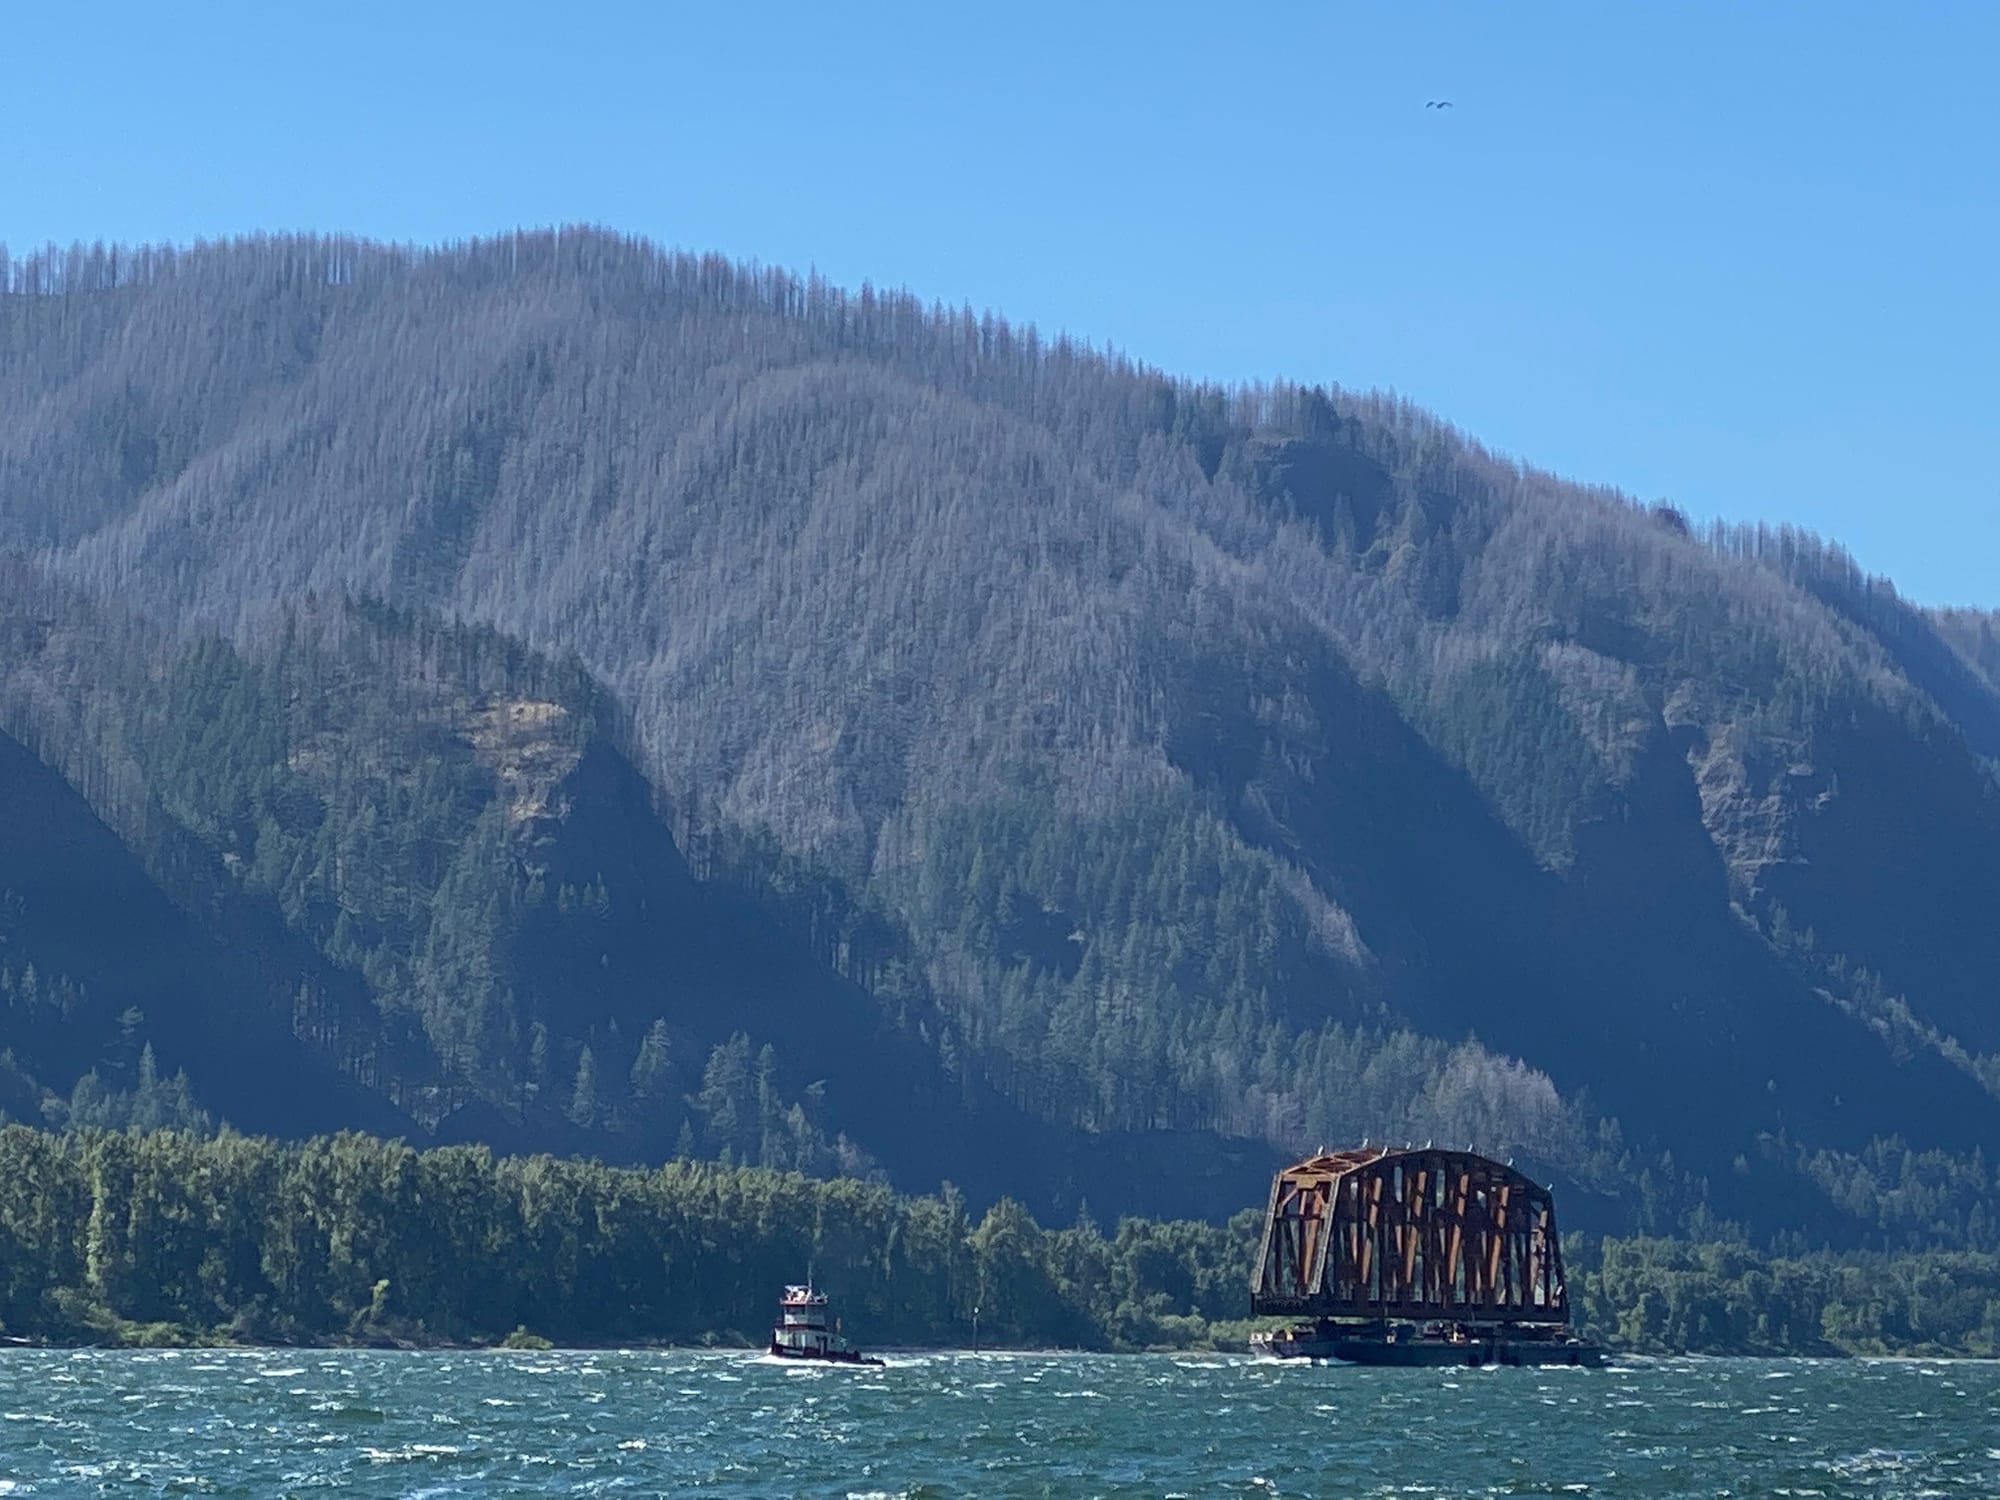 Bernadette Price of Skamania caught this photo of a BNSF Railway bridge in transit on the Columbia River to its new home on Drano Lake.